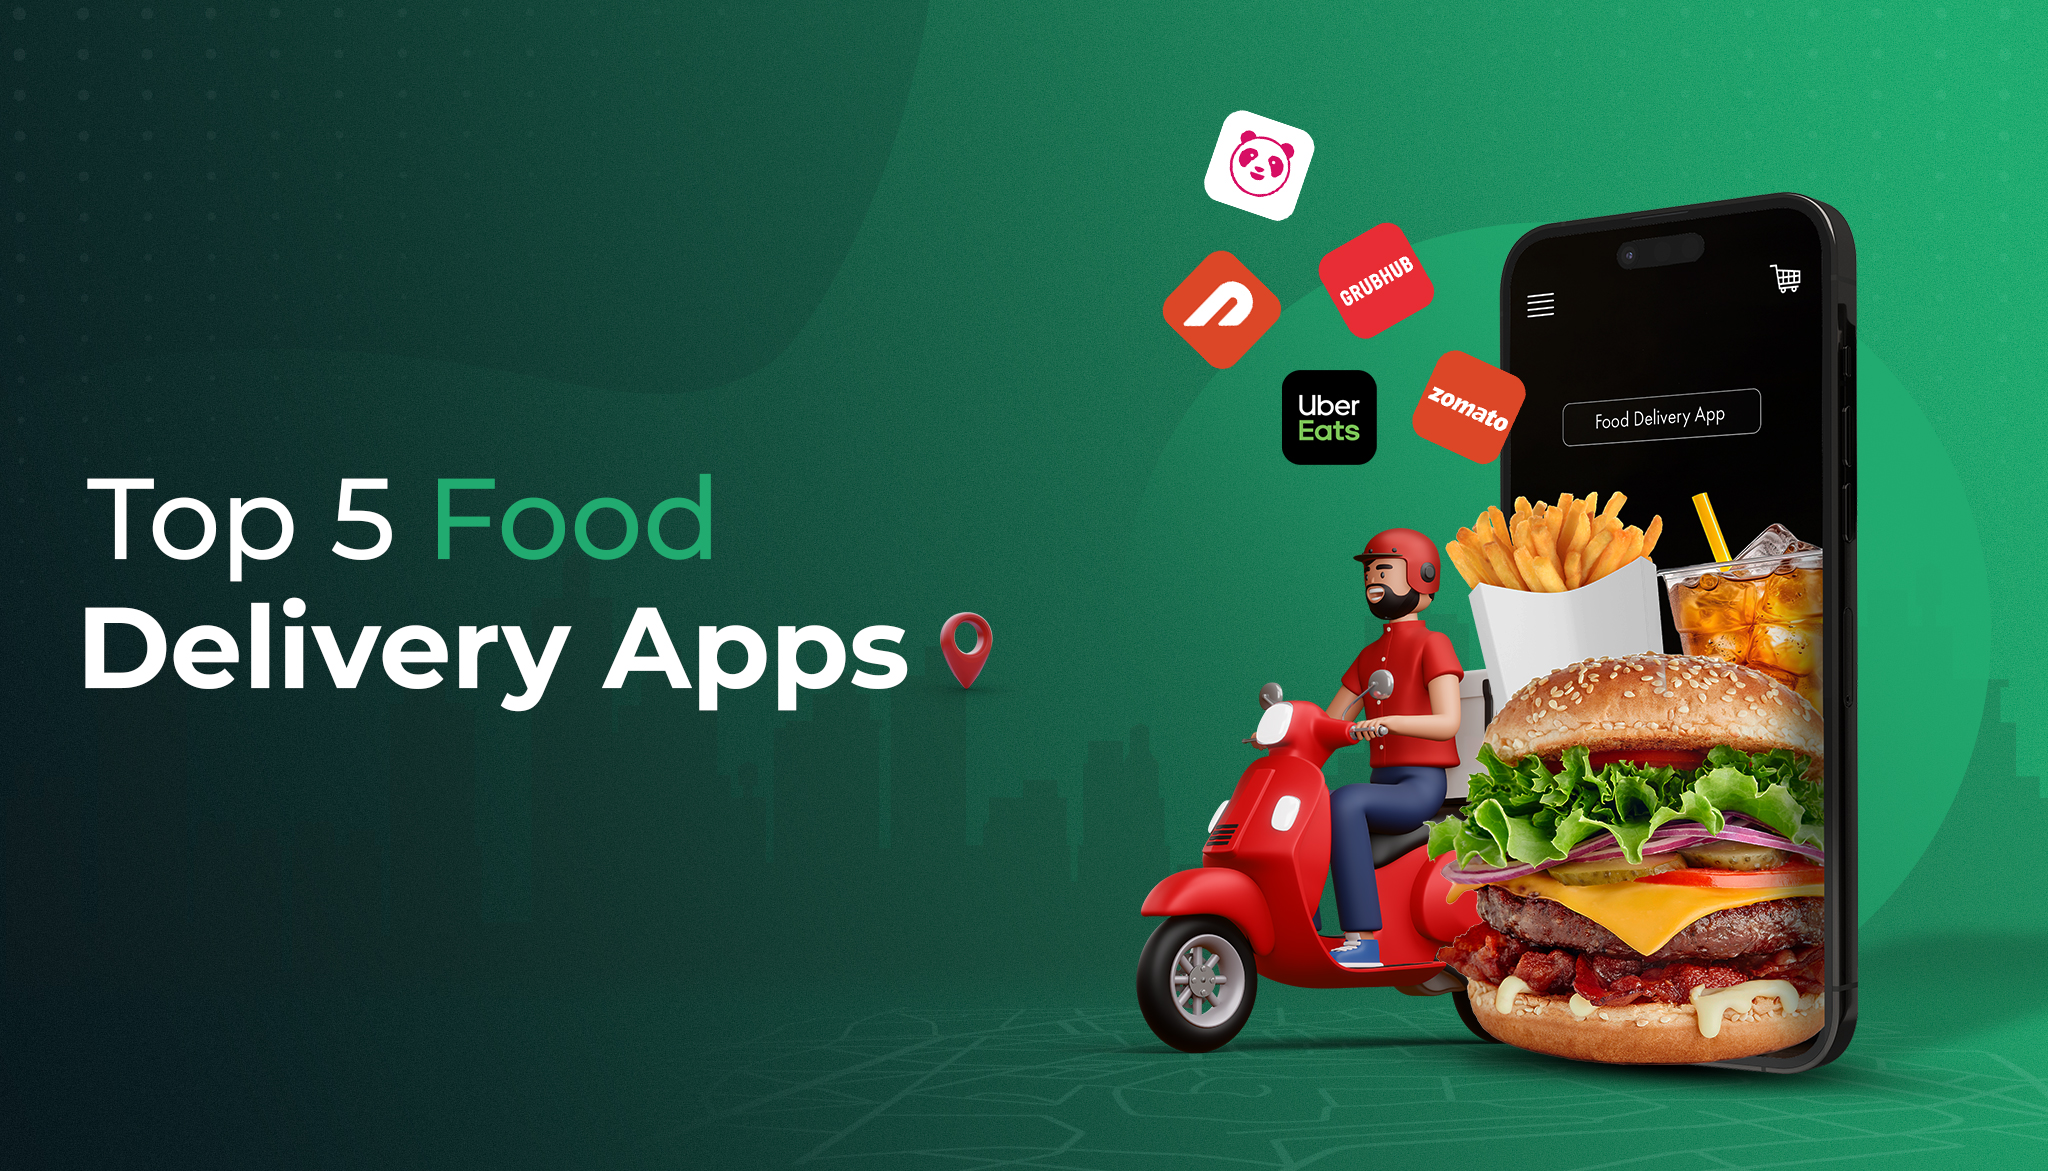 Top 5 food delivery apps : A brief analysis